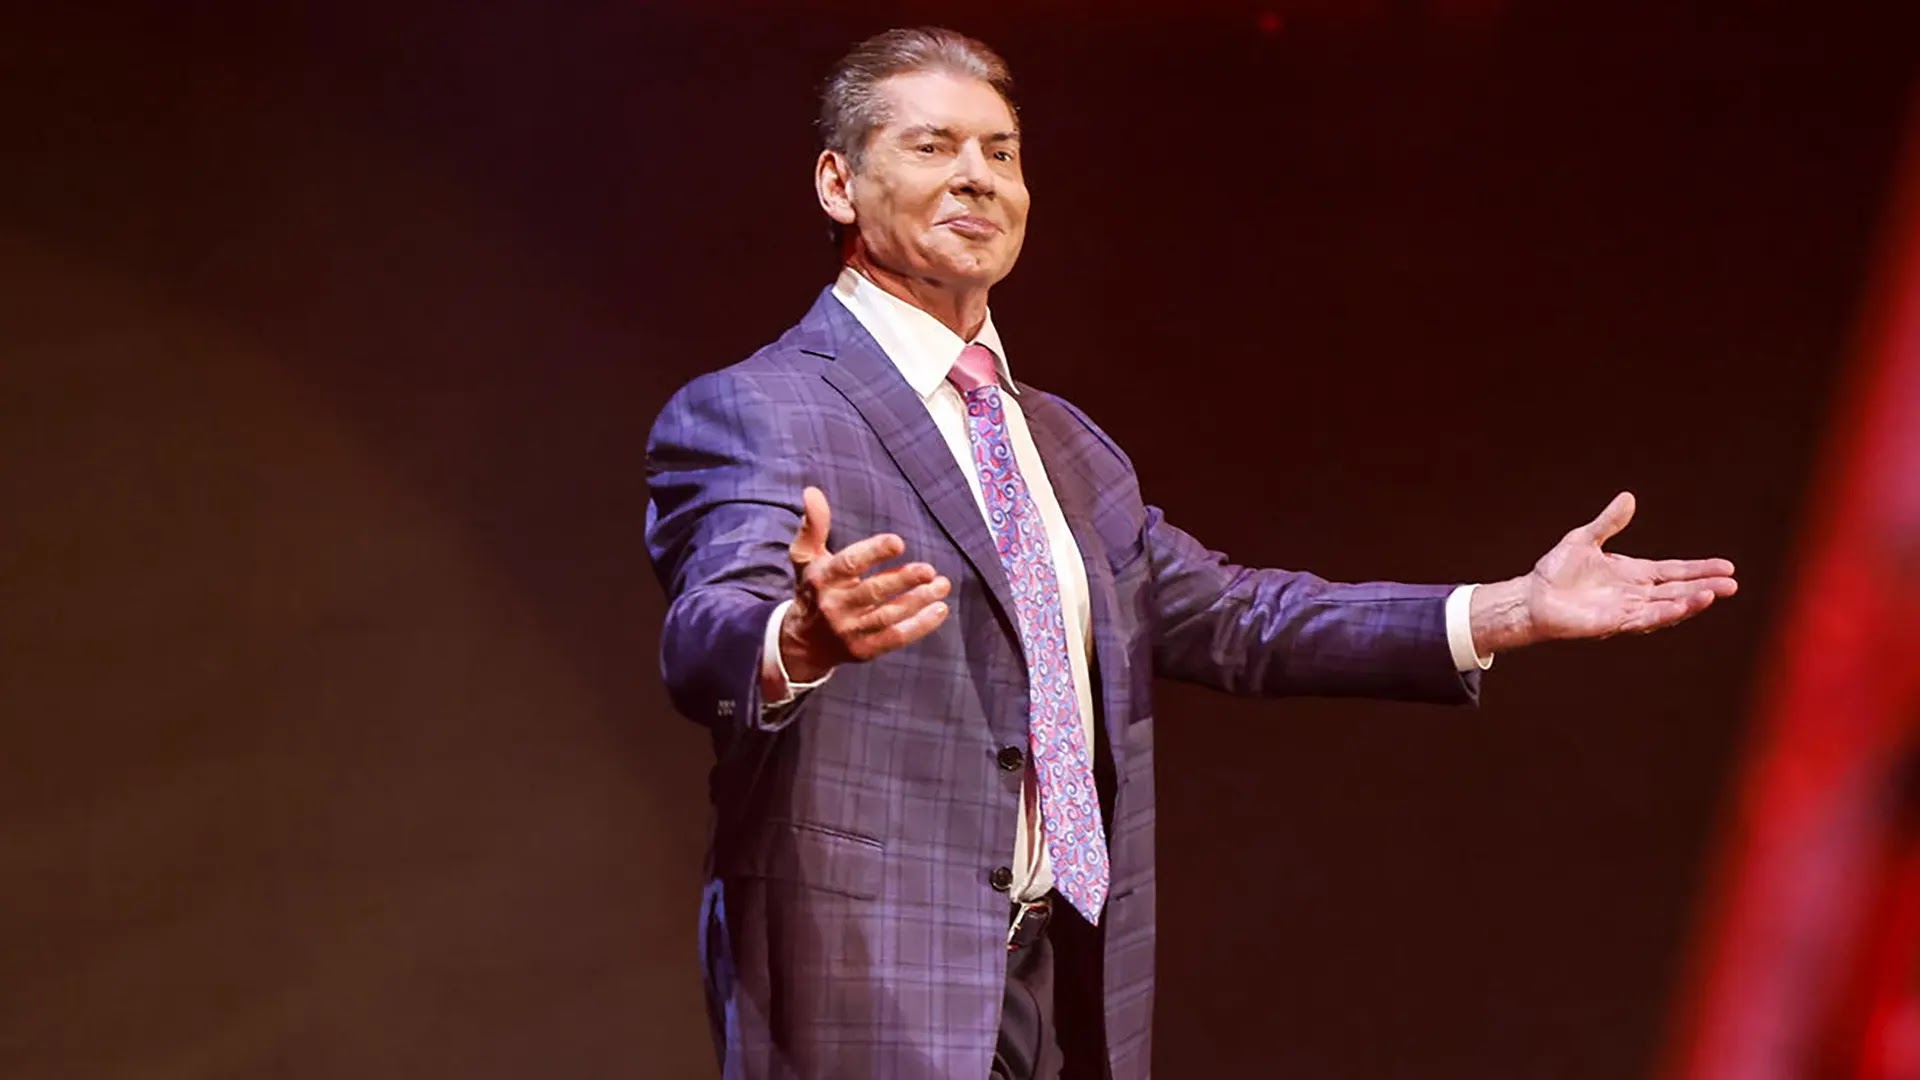 WWE Responds To The Report Of Vince McMahon Paying $12 Million In Hush Money To 4 Women